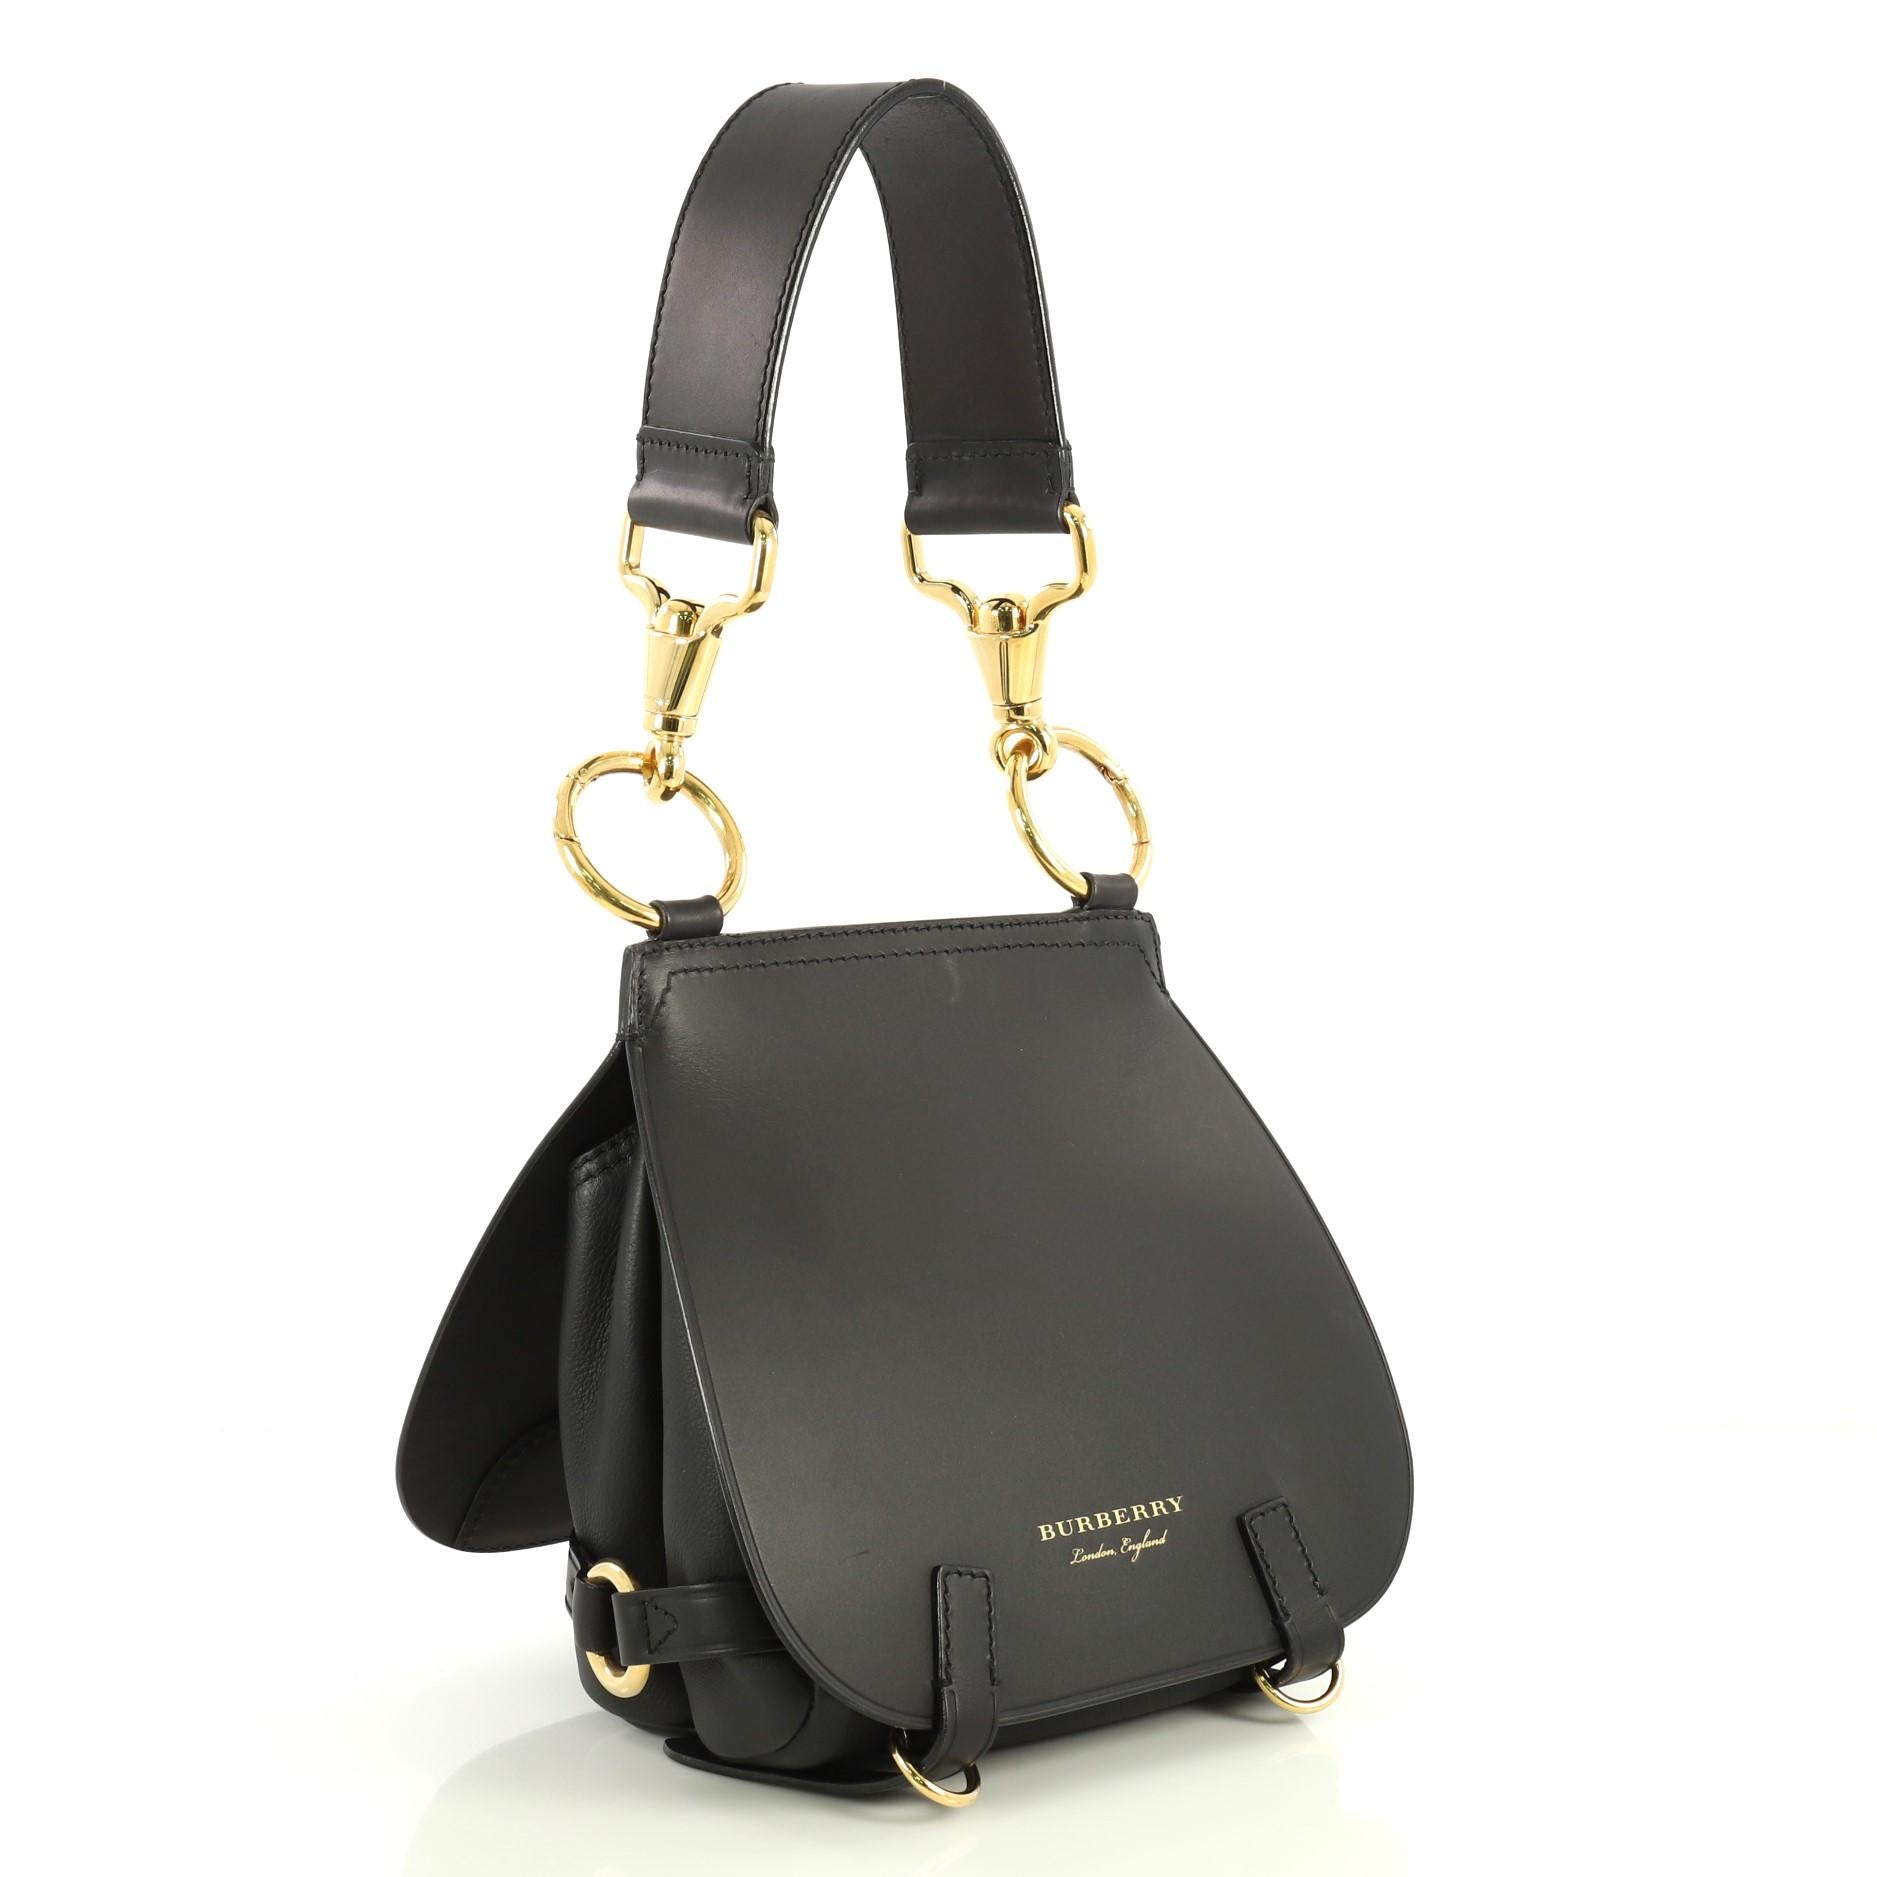 This Burberry Bridle Handbag Leather Medium, crafted from black leather, features leather top handle, front flap compartment with D-ring closure, back flap compartment with magnetic closure and gold-tone hardware. It opens to a black microfiber